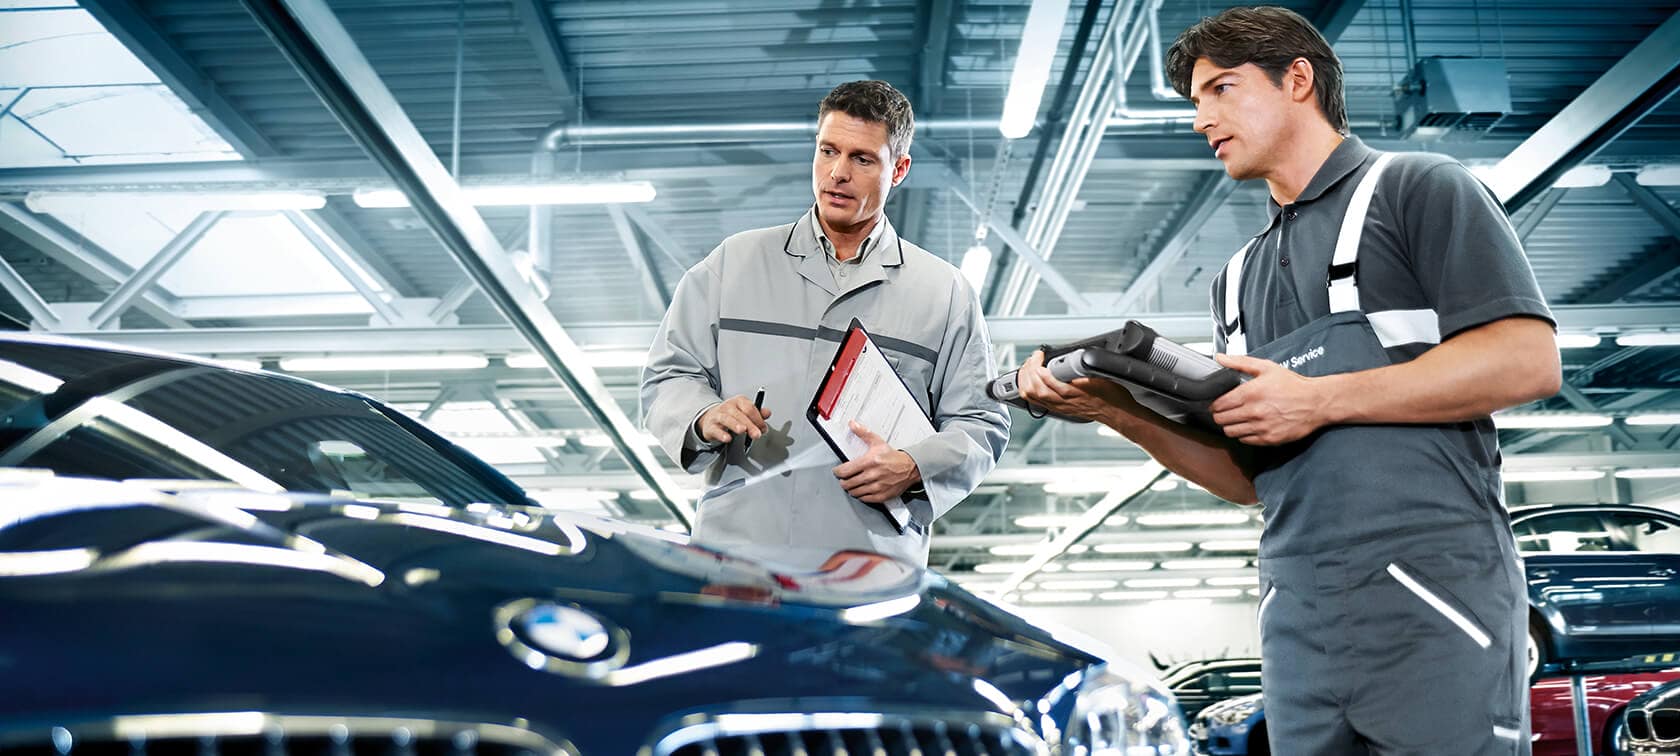 Two mechanic inspecting a BMW car in mechanic's shop